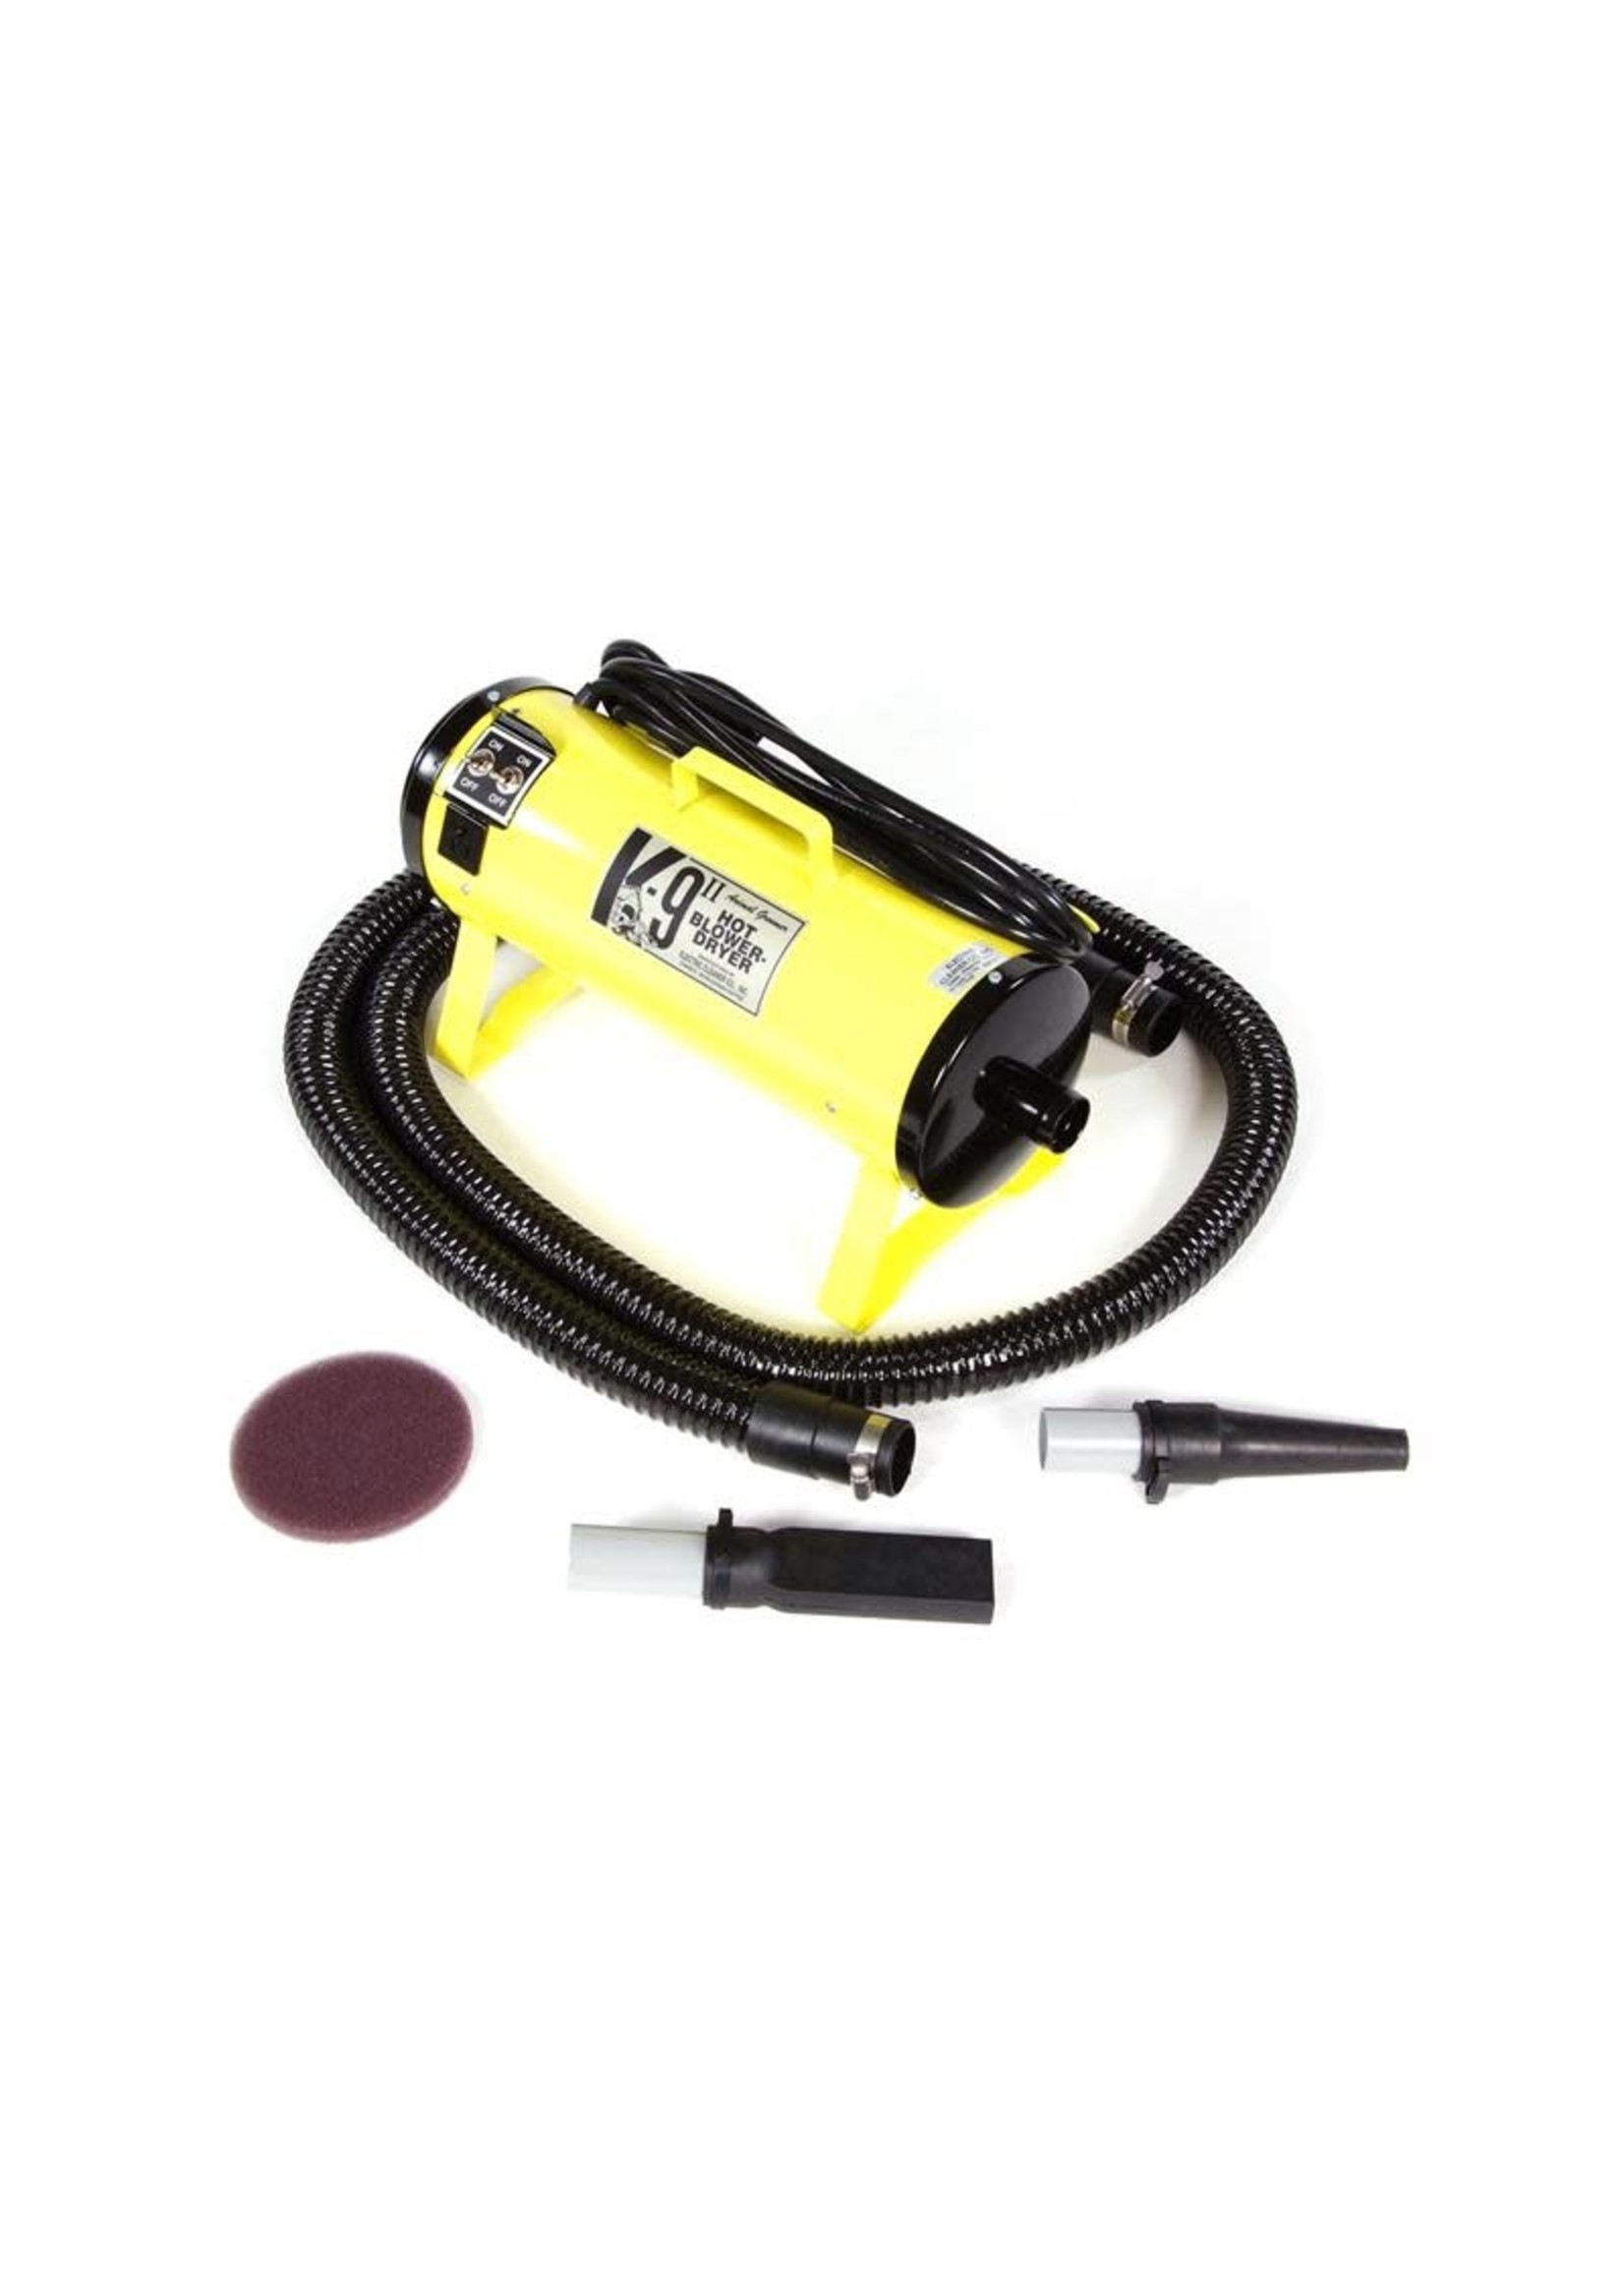 Electric Cleaner Electric Cleaner K-9II Dryer 2-speed